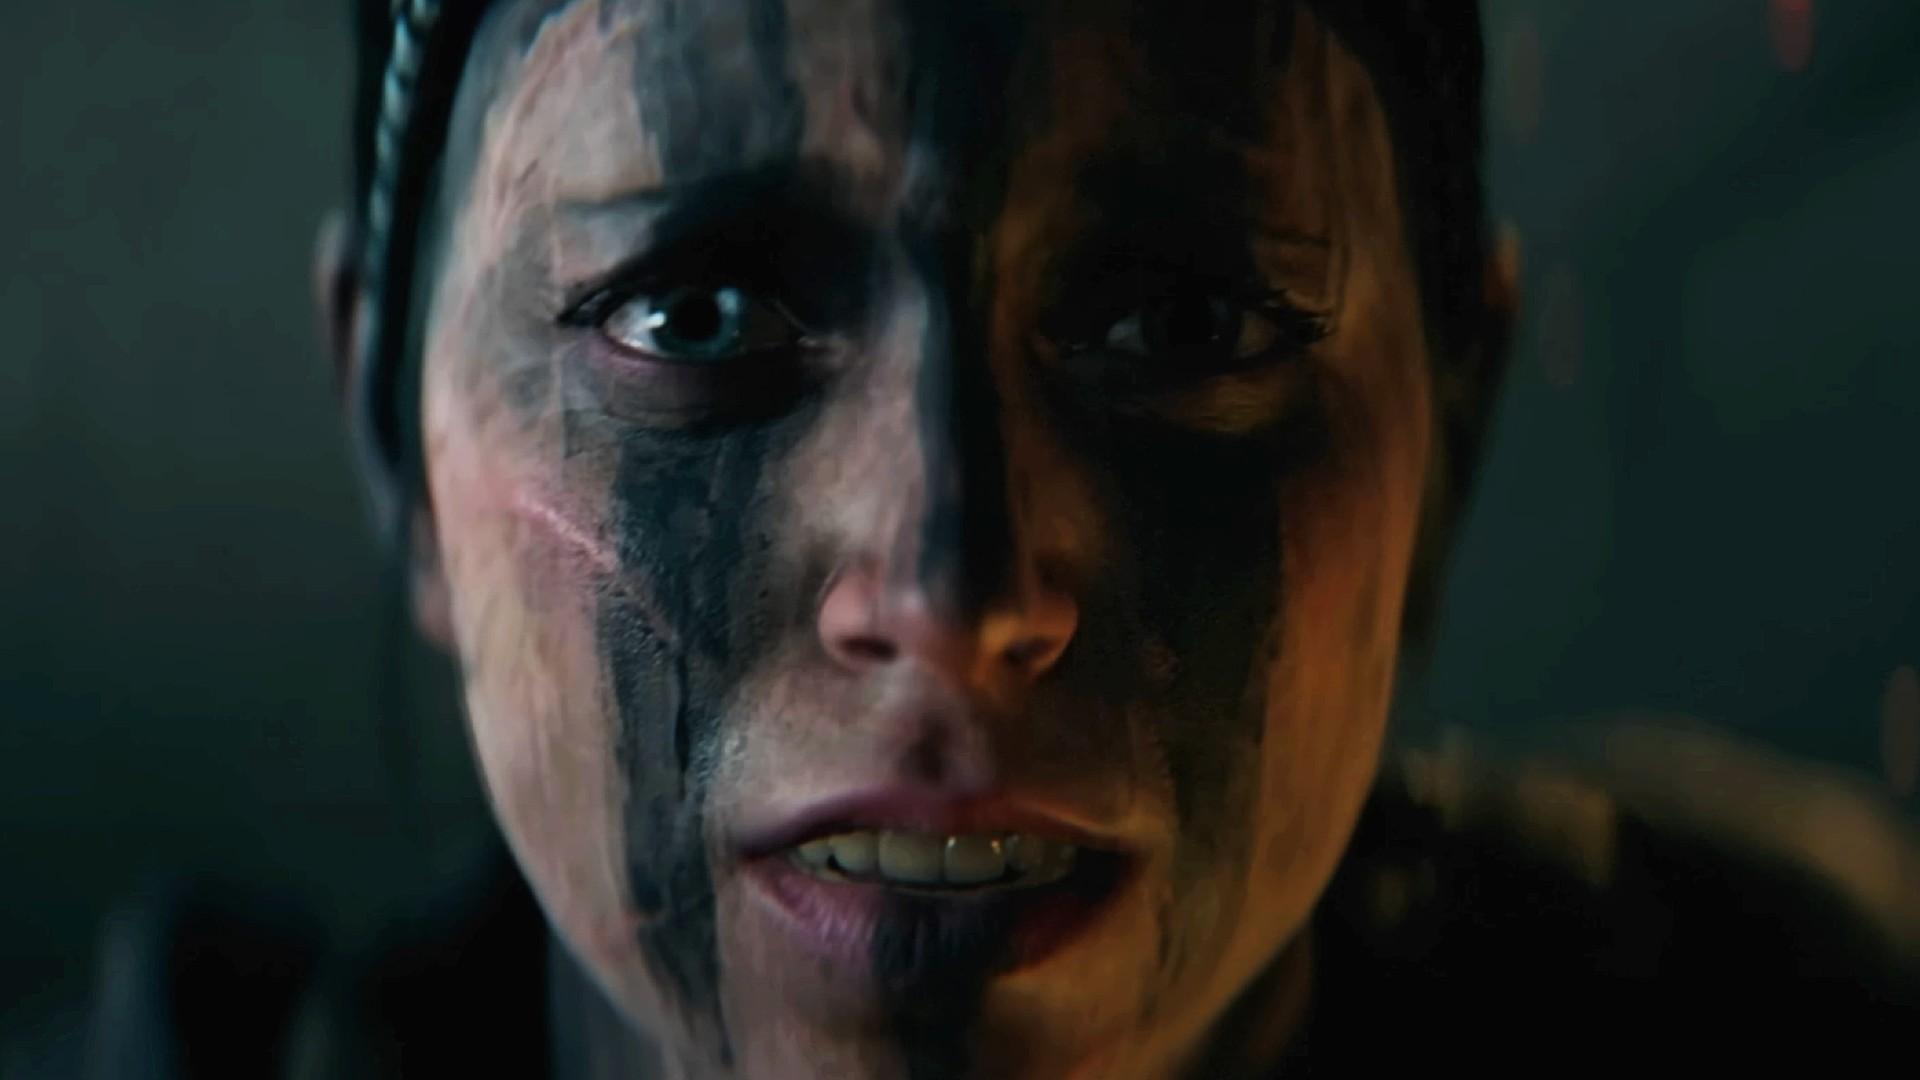 Hellblade 2 release date window, trailers, gameplay, and more